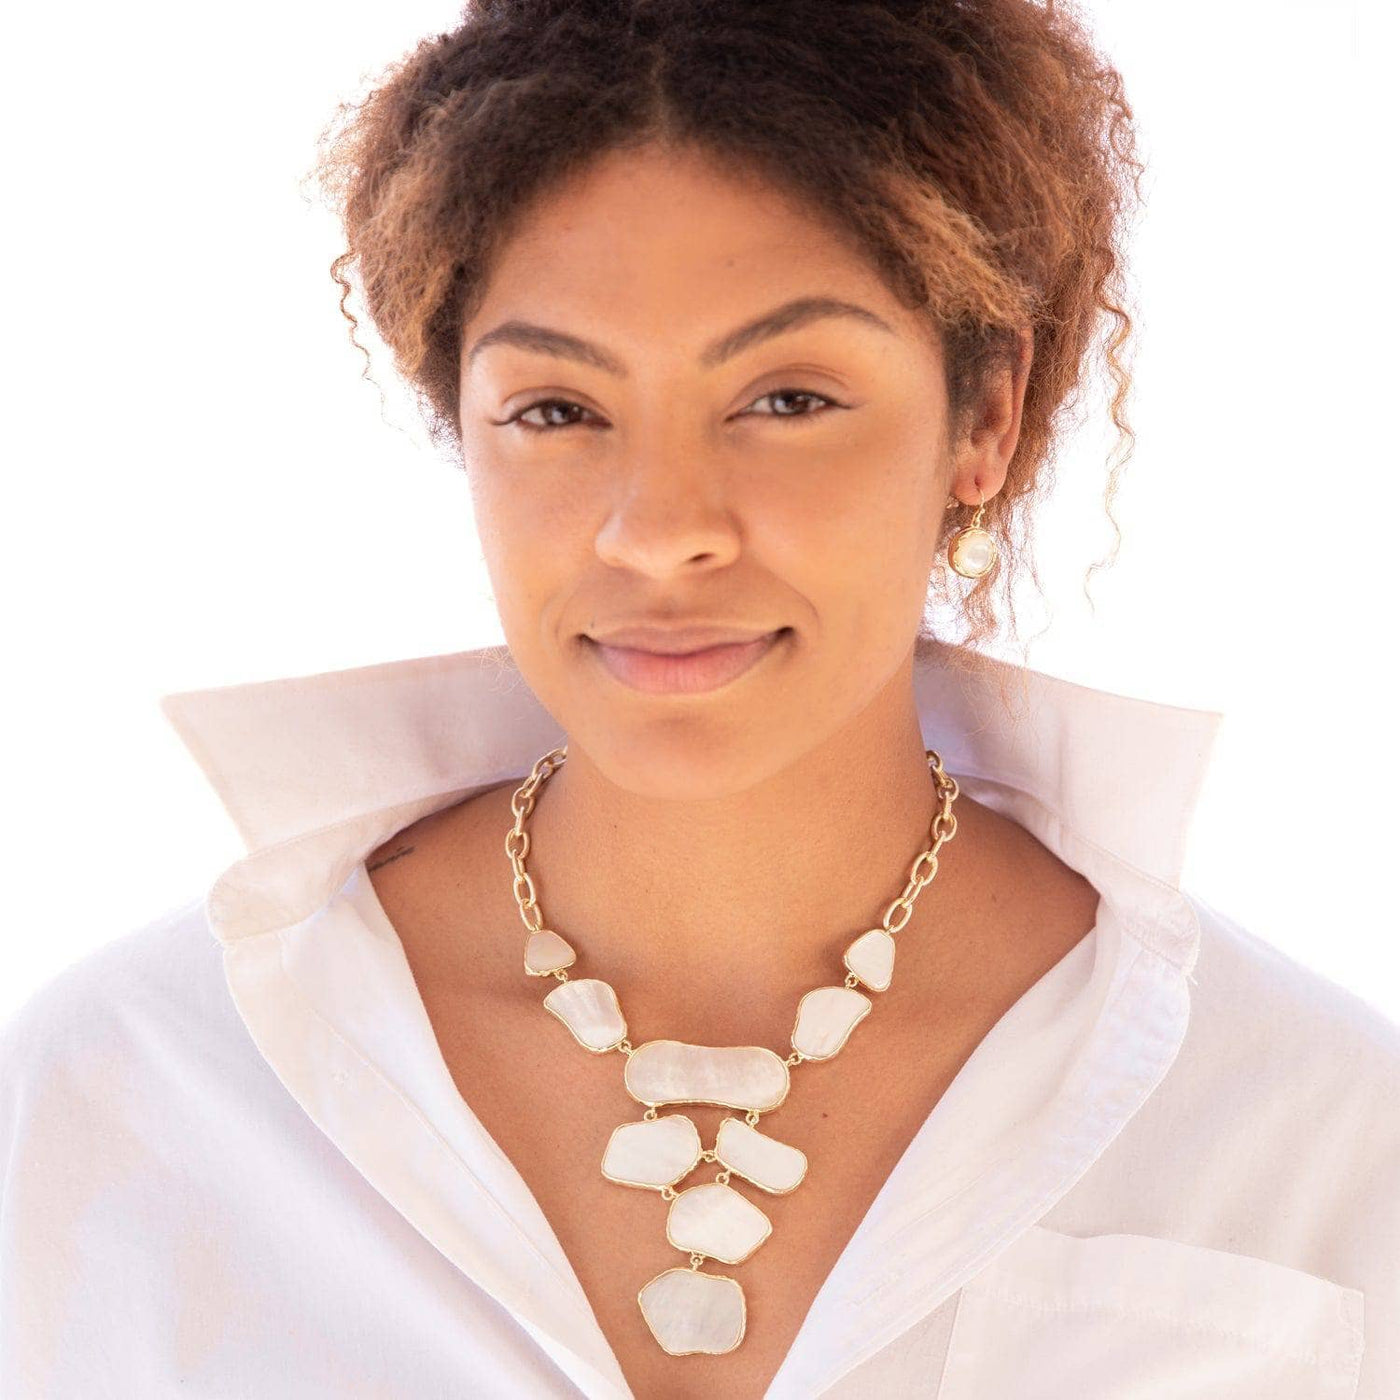 Harlow & Dylan by HEIDI DAUS®"Waves" White Mother of Pearl Statement Necklace